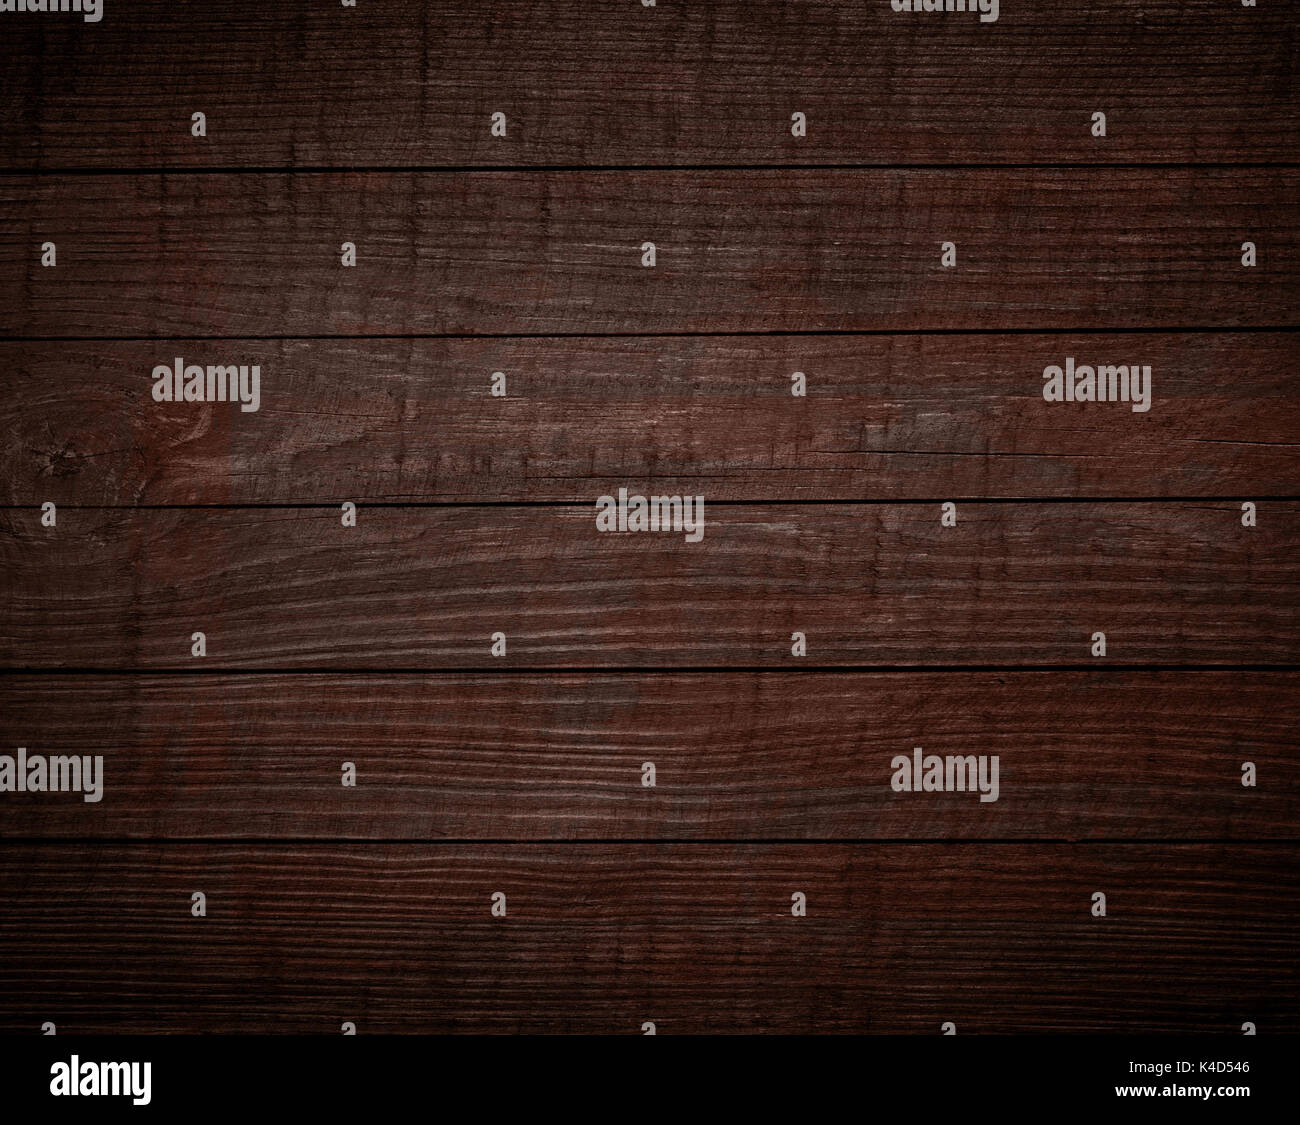 Brown wooden wall, planks, table, floor surface. Dark wood texture. Stock Photo